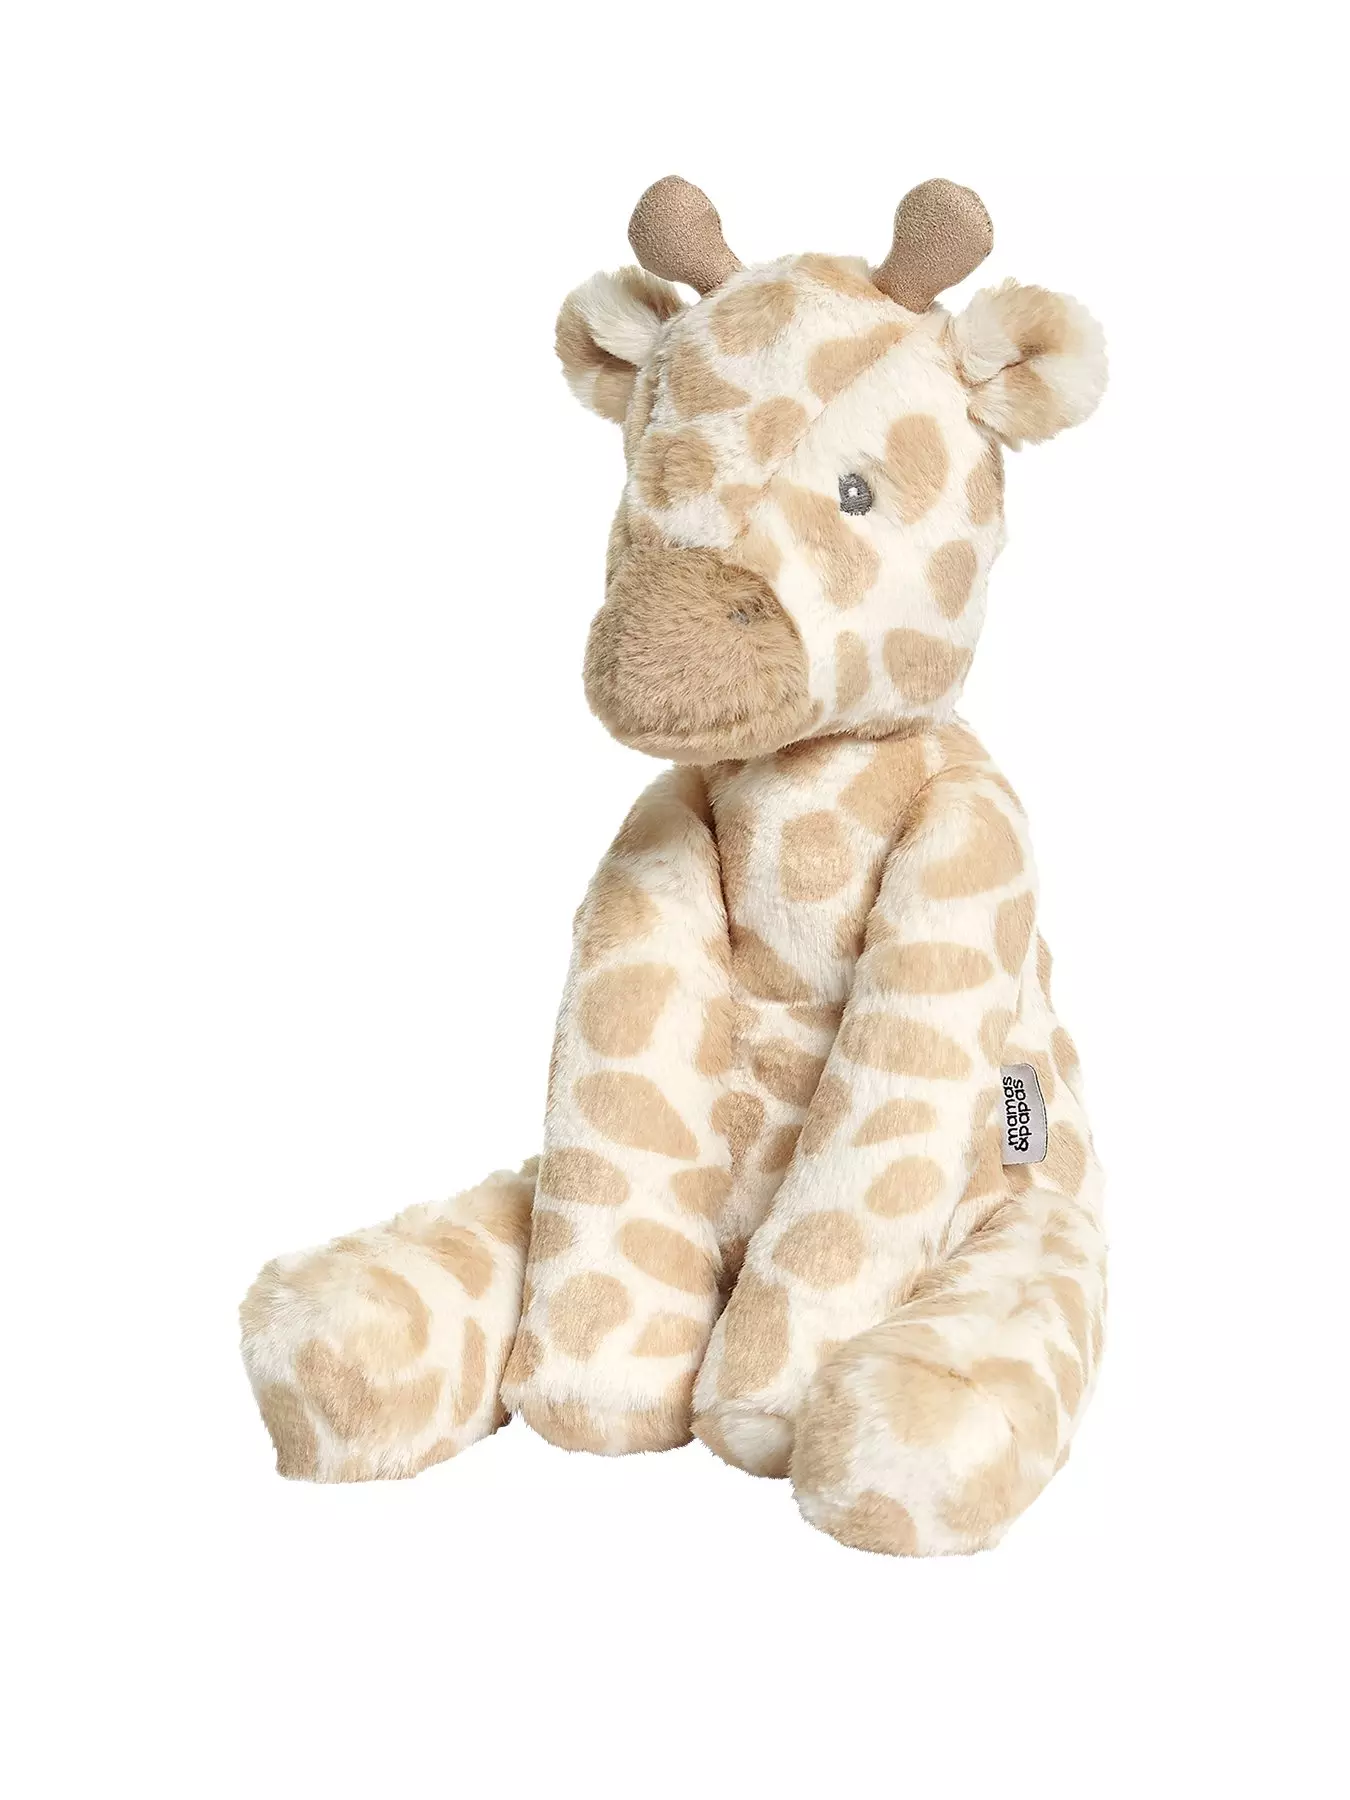 Baby Soft Toys  Shop Baby Soft Toys at